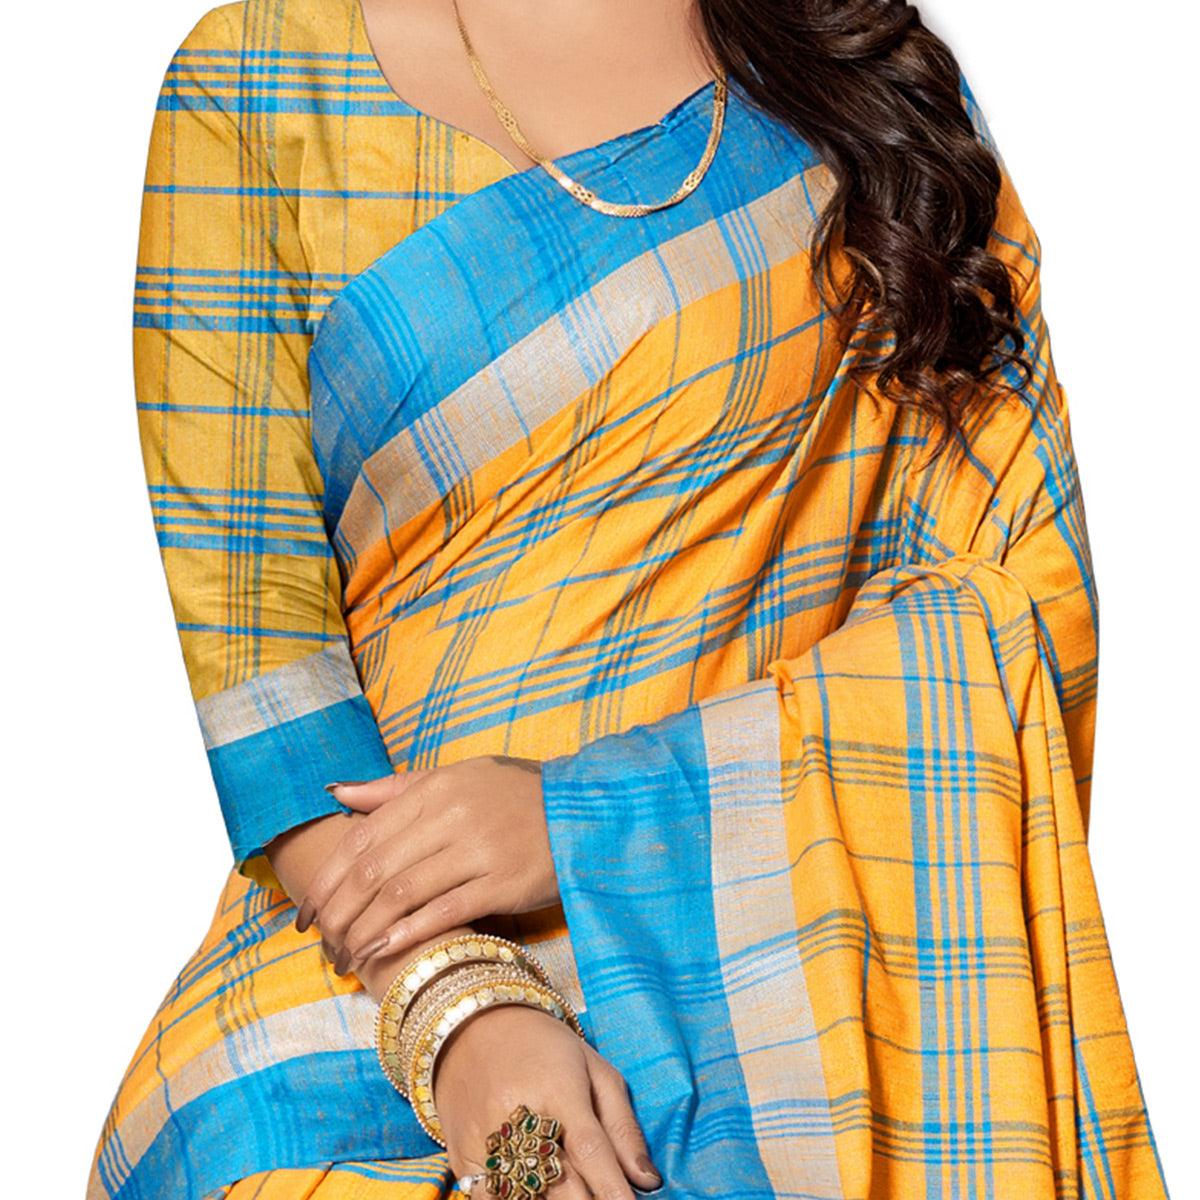 Captivating Yellow Colored Fesive Wear Stripe Print Cotton Silk Saree With Tassels - Peachmode